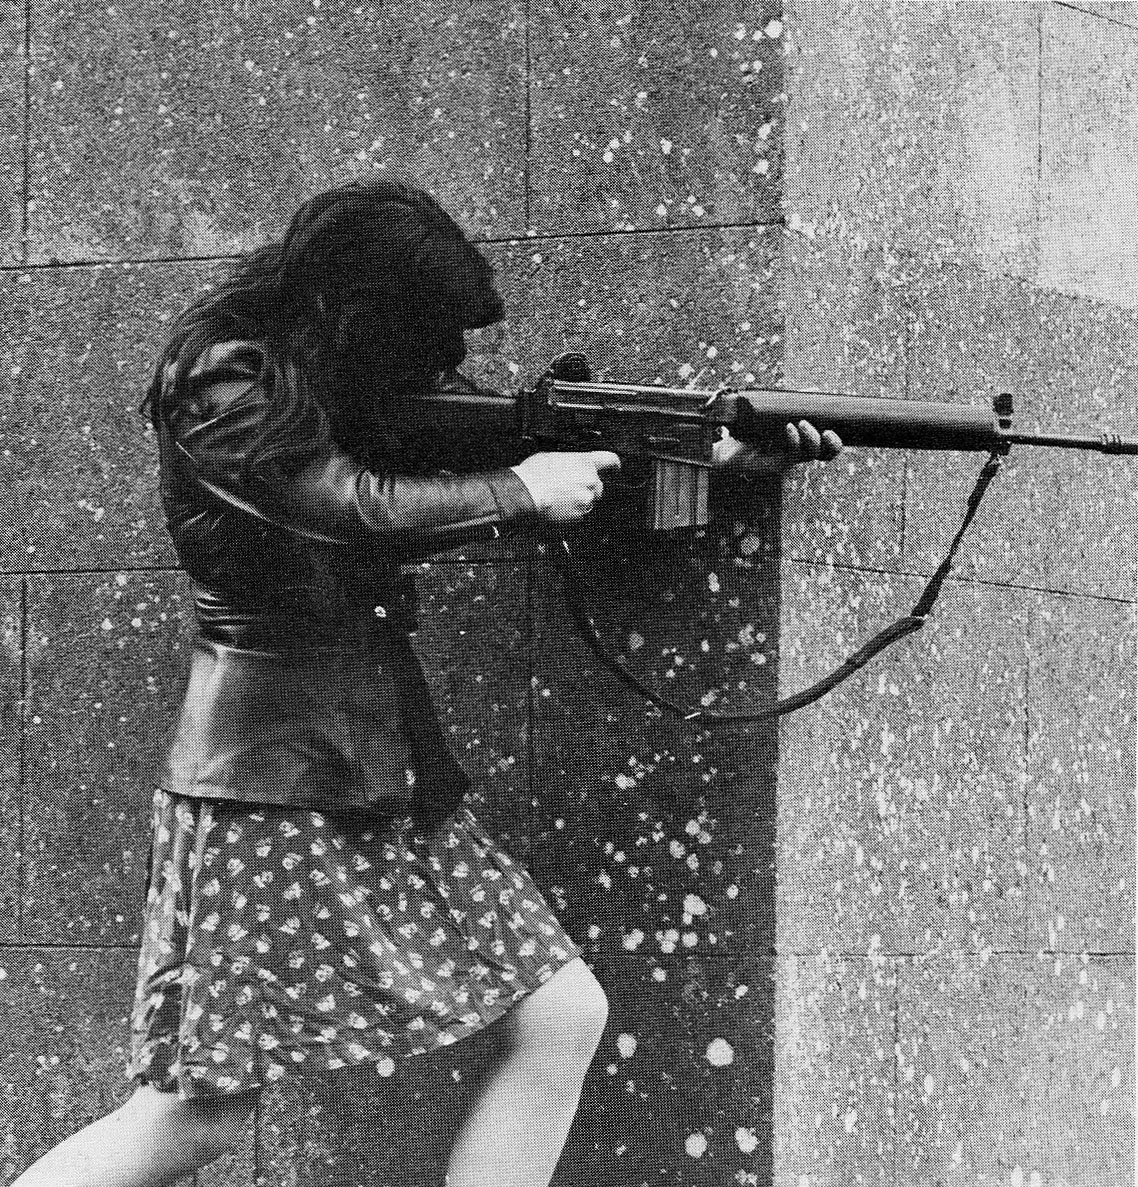 IRA fighter fires an AR-18 at Pro-British troops during skirmishes in County Armin, Northern Ireland, 1972.